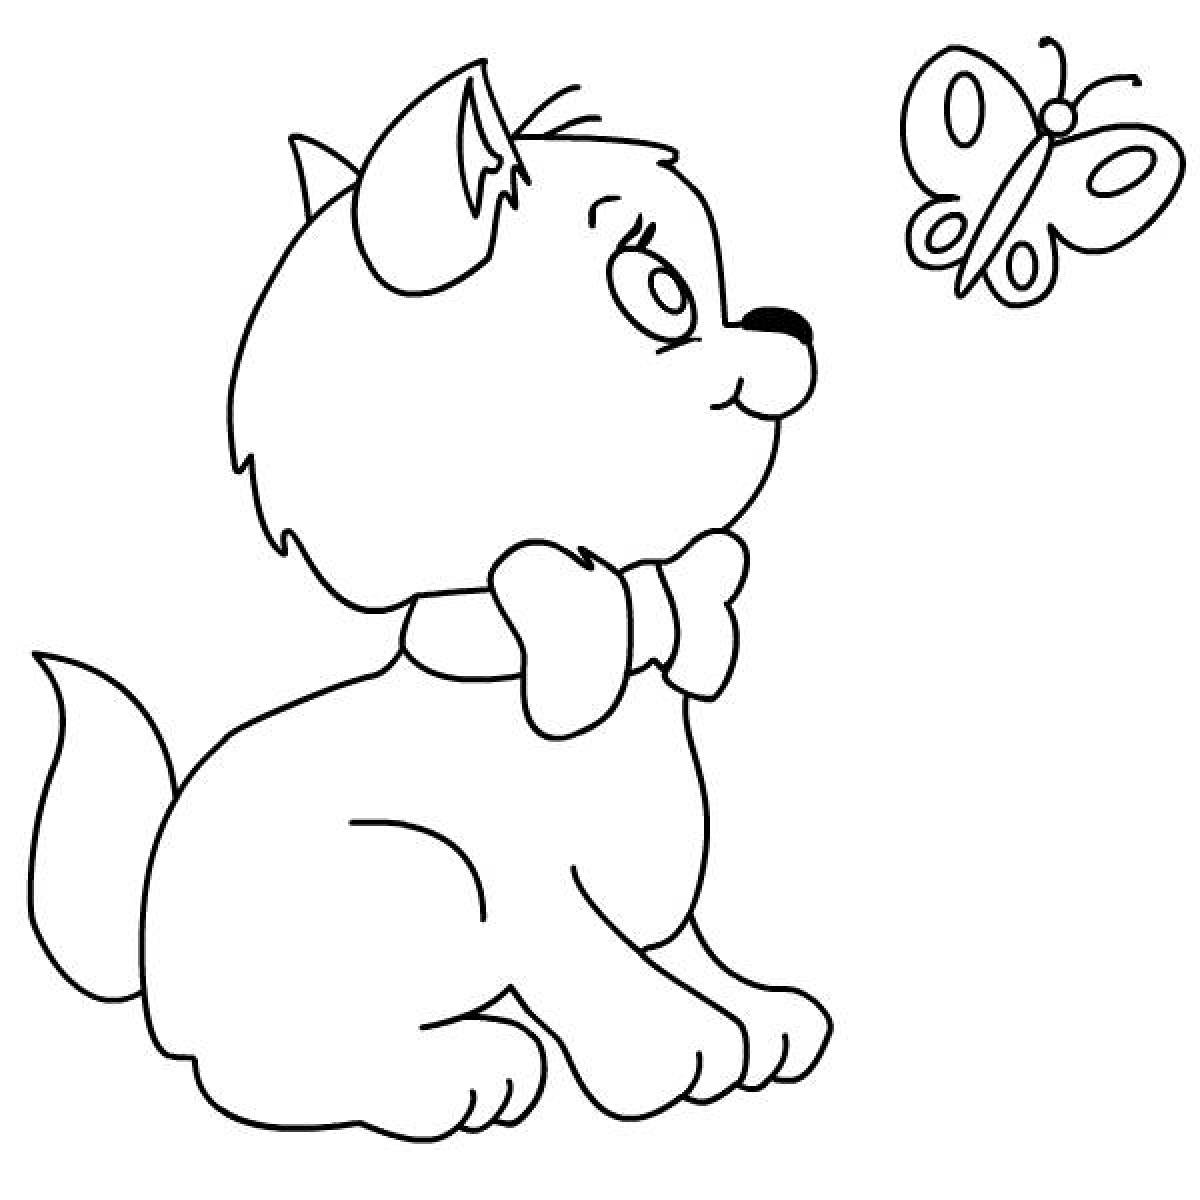 Naughty coloring pages dogs and kittens for kids